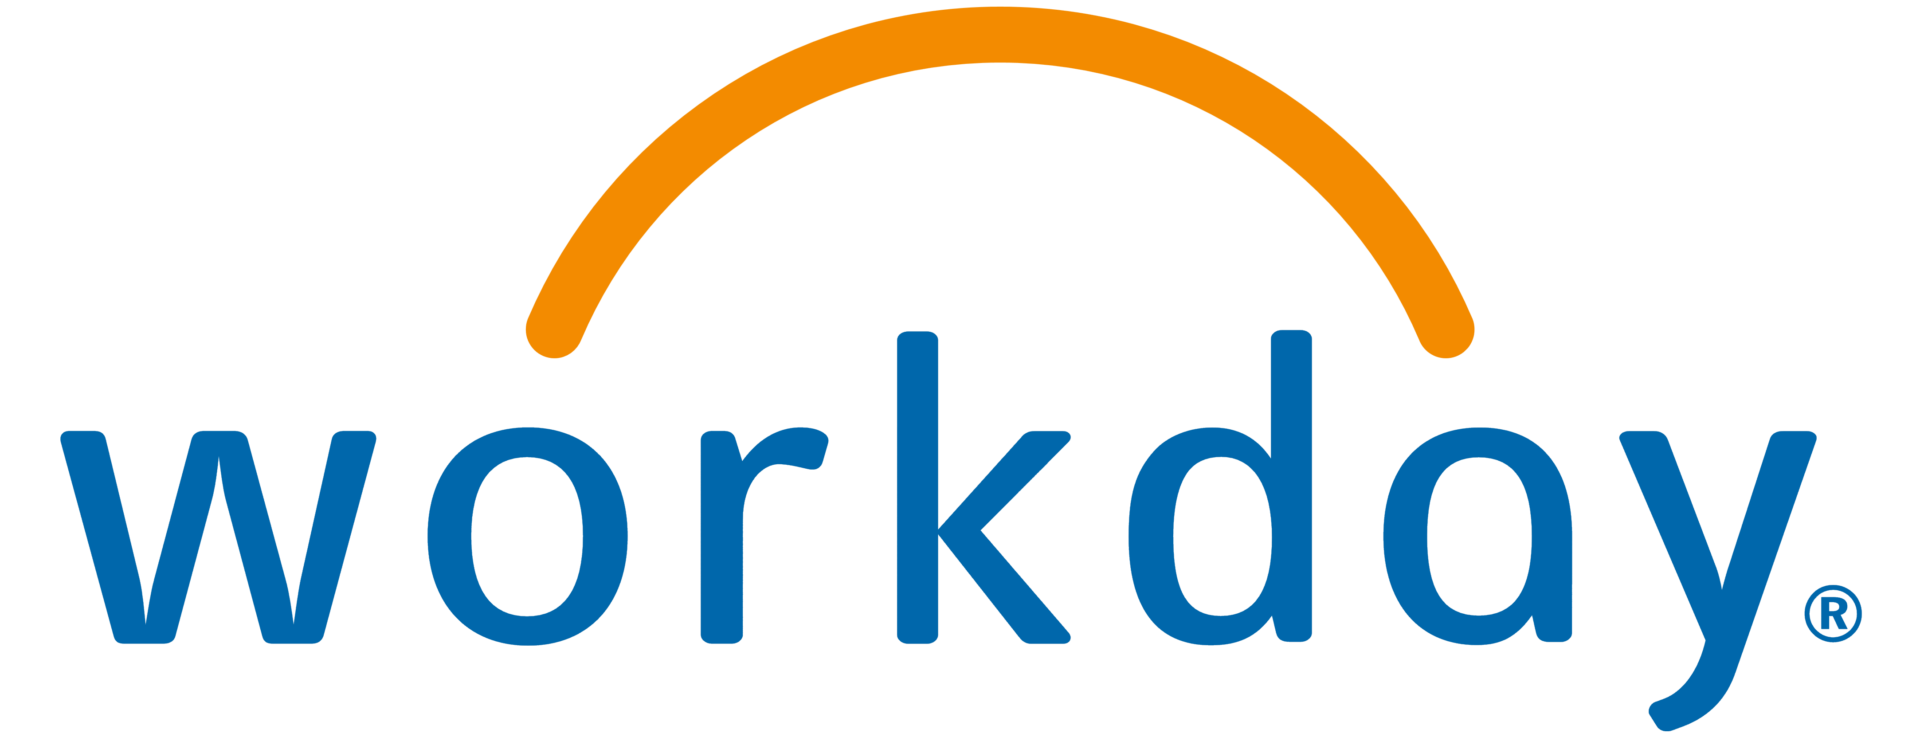 Case Study - WORKDAY